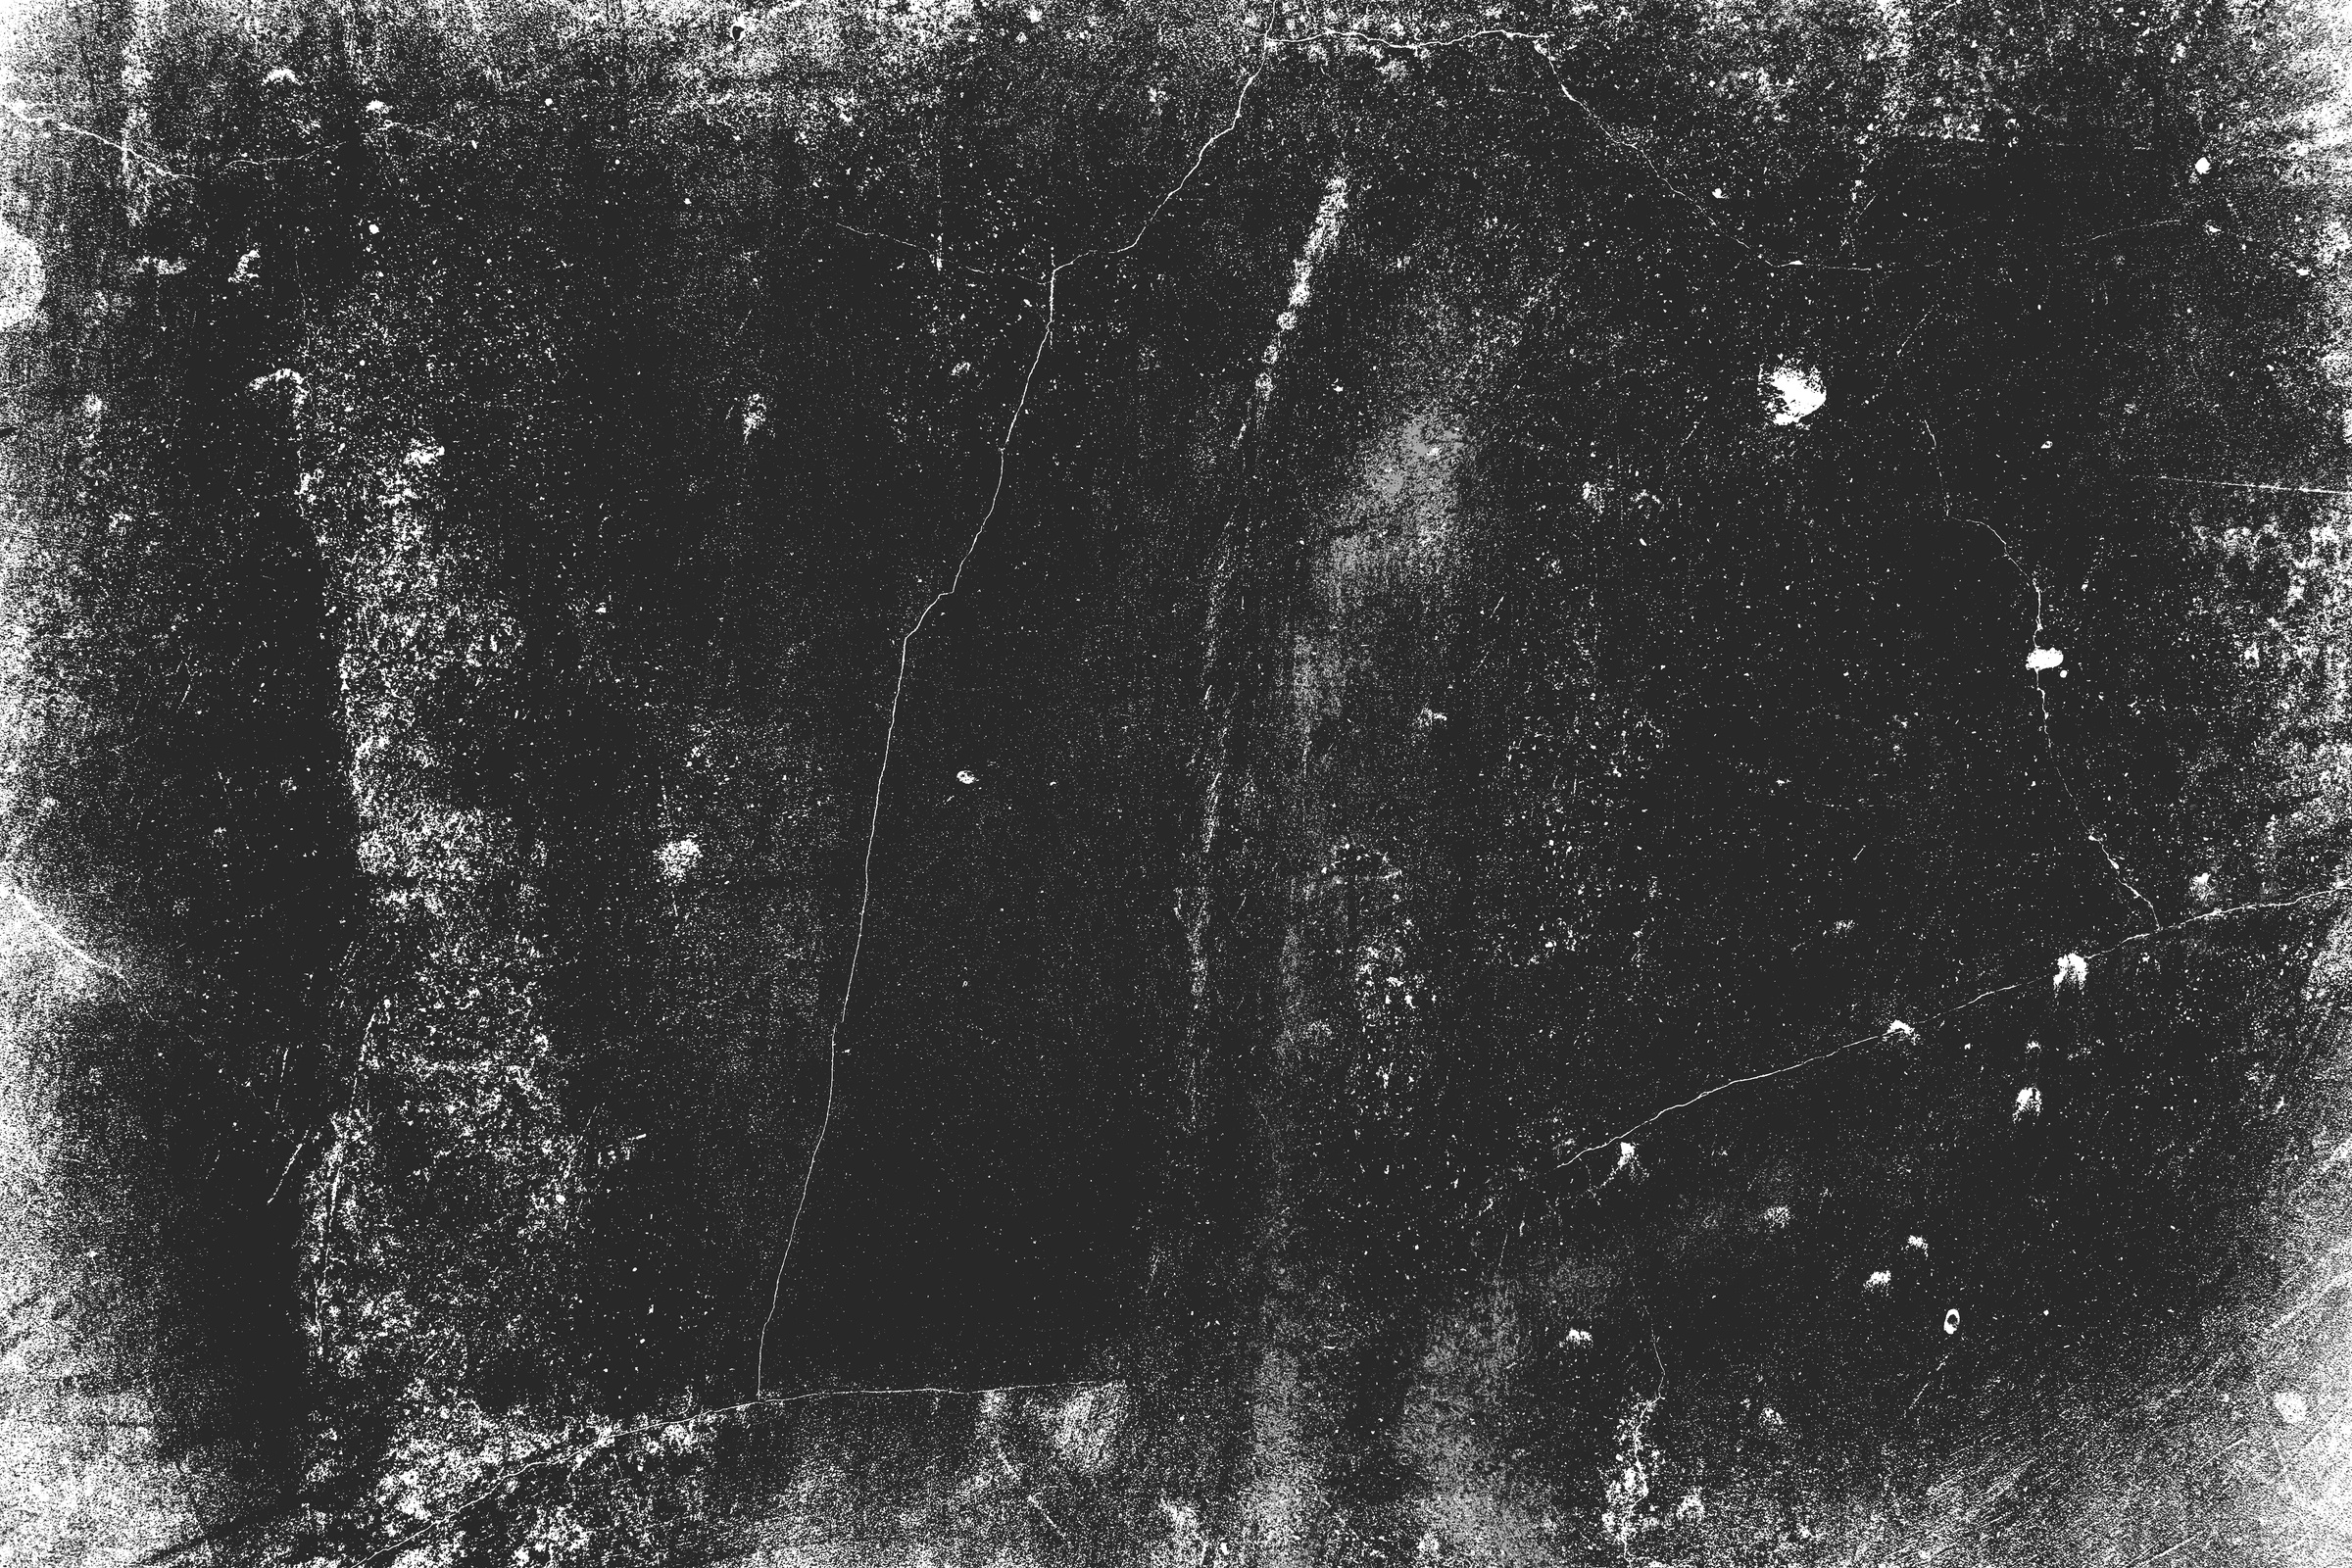 Abstract Dust Distressed Overlay Grunge Edges Texture . Black and White Scratched Dust Texture, Distressed Ink Paint Texture for Background.